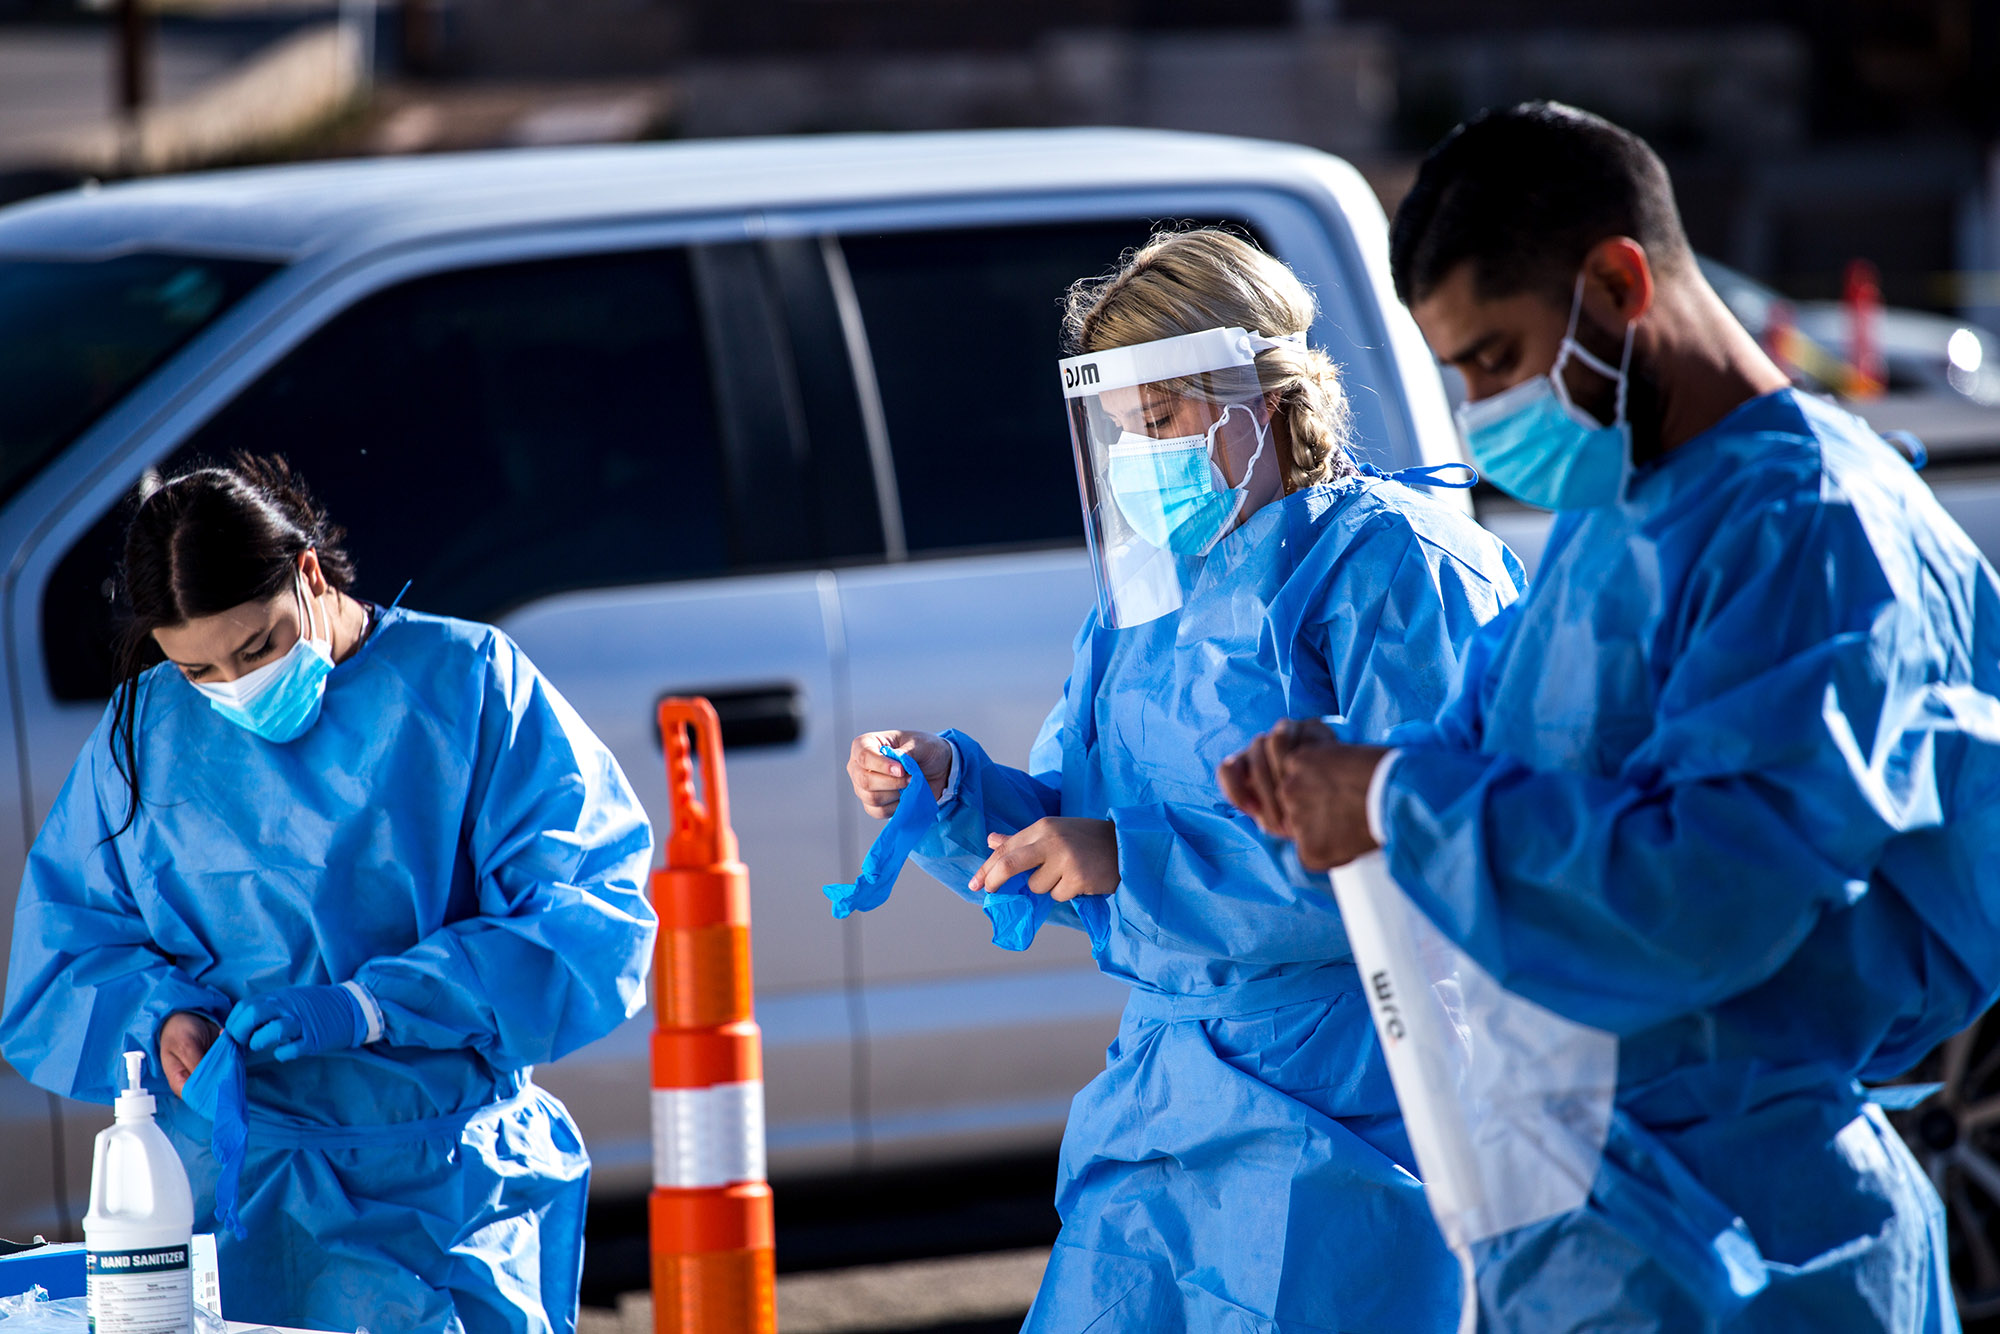 Medical workers put on personal protective equipment (PPE) before starting shifts at a Covid-19 drive-thru testing site in El Paso, Texas, on Monday, November 9. 